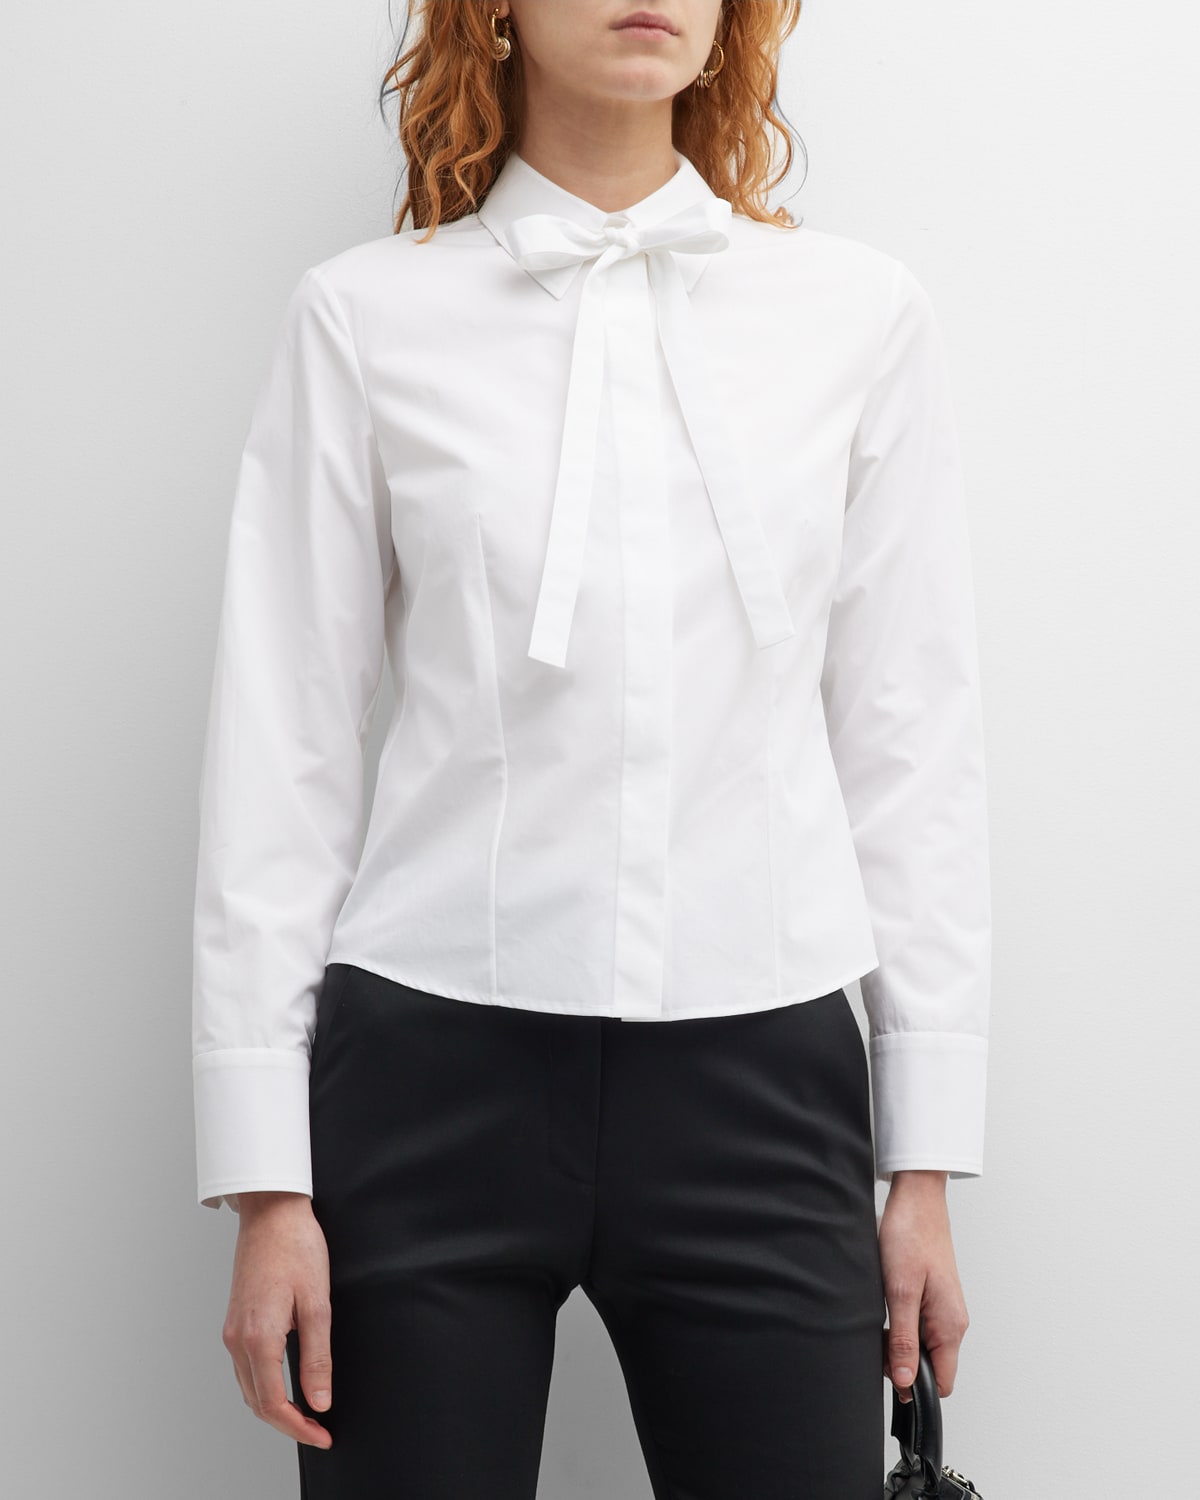 Bow-Neck Collared Shirt